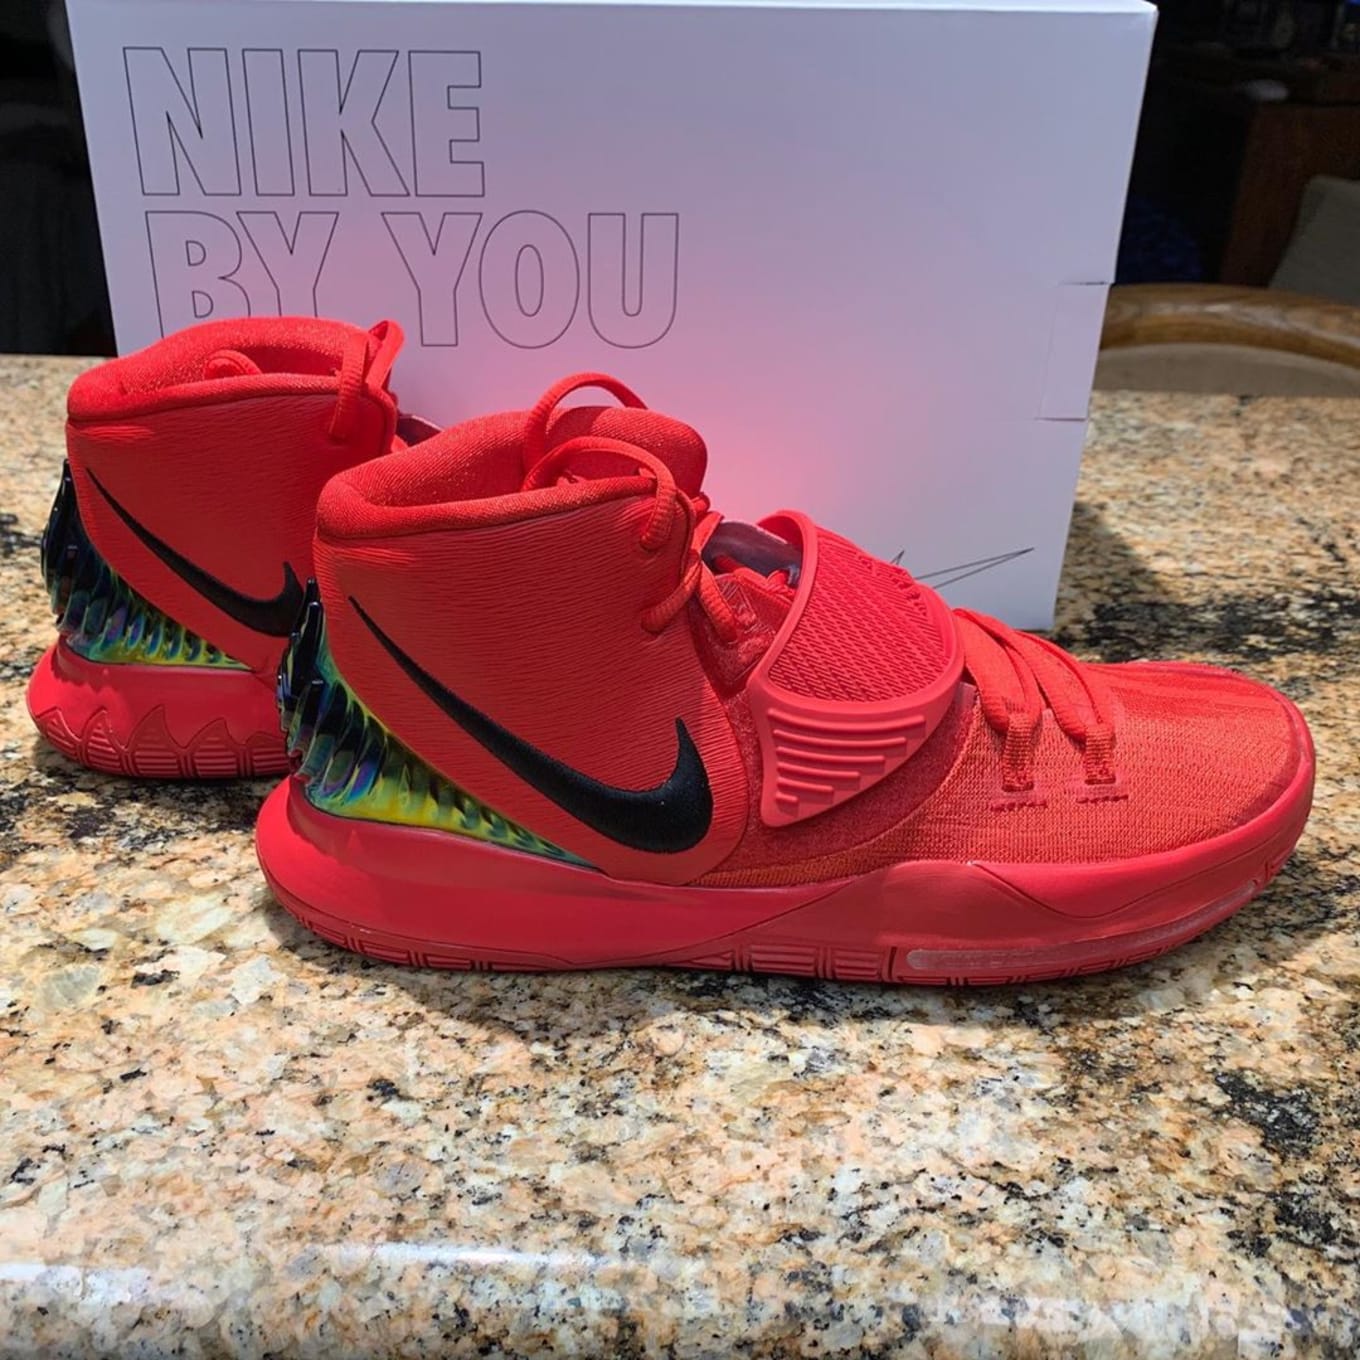 Nike iD By You Kyrie 6 | Sole Collector